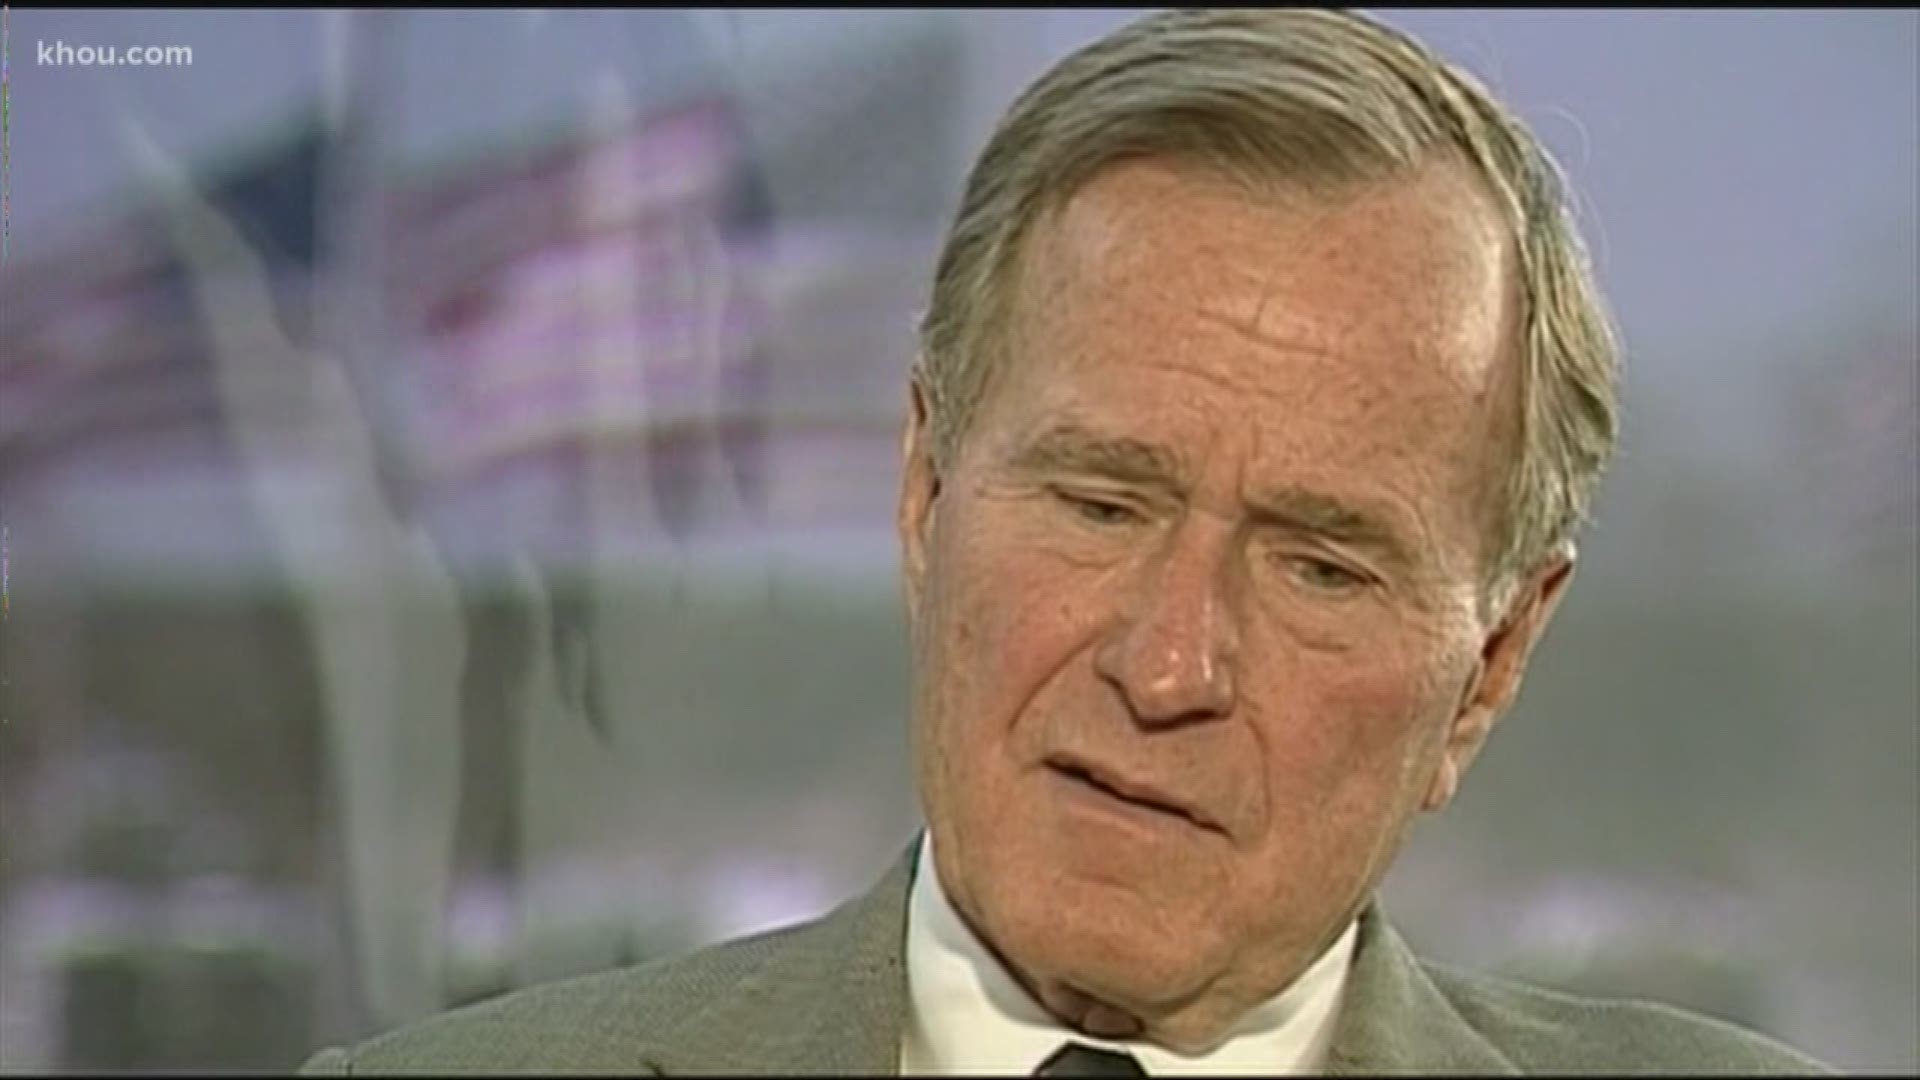 George H.W. Bush led an incredible life. He was a World War II fighter pilot, President of the U.S. and father of another president. We take a look back on the life of a man who played such an important role in American and Houston history.